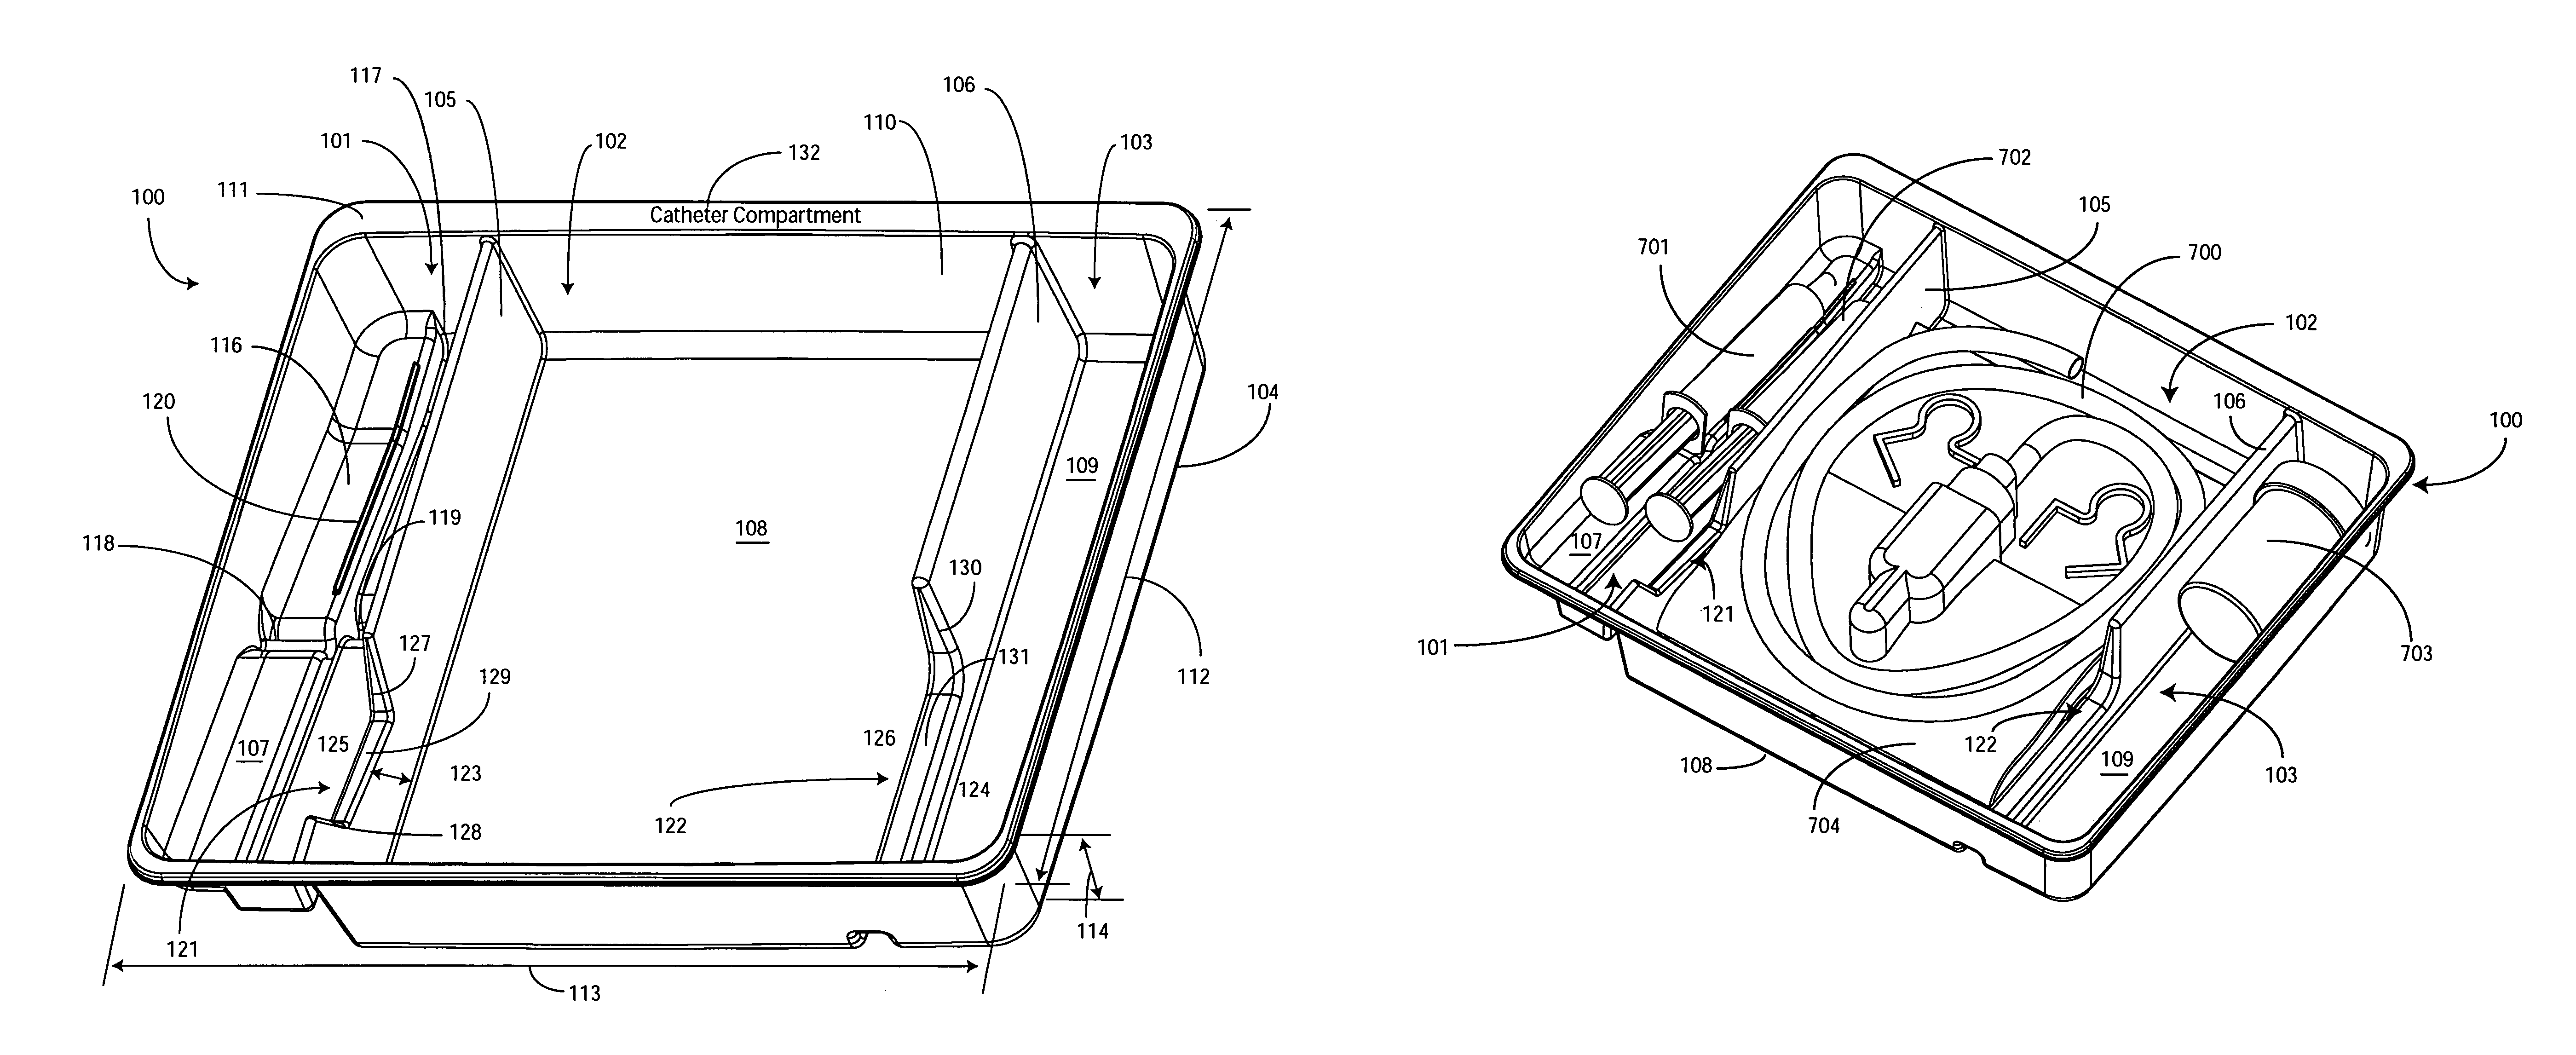 Catheter tray, packaging system, and associated methods